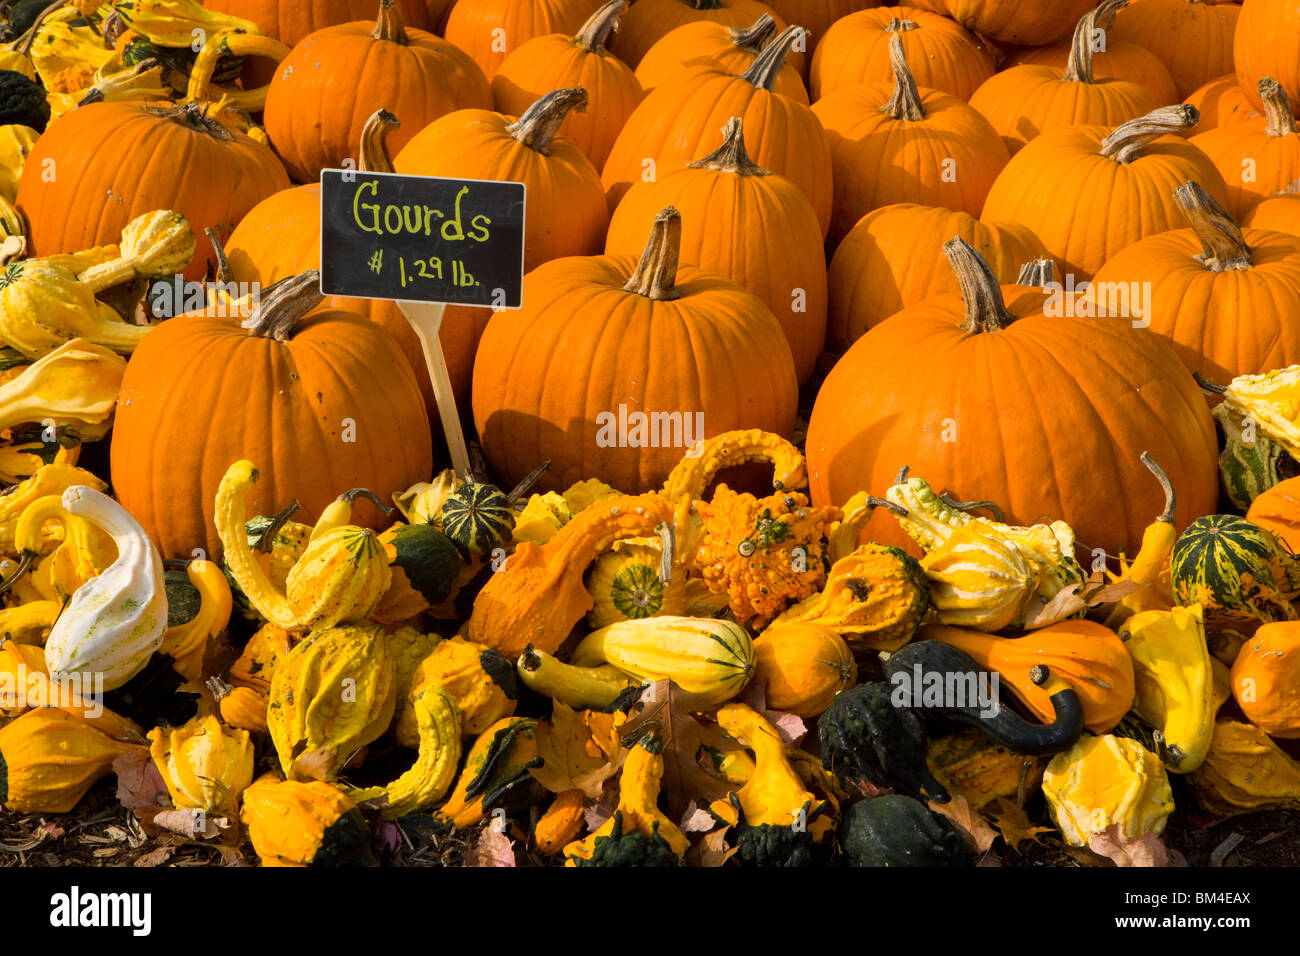 A display of gourds at the Moulton Farm farmstand in Meredith, New Hampshire. Stock Photo